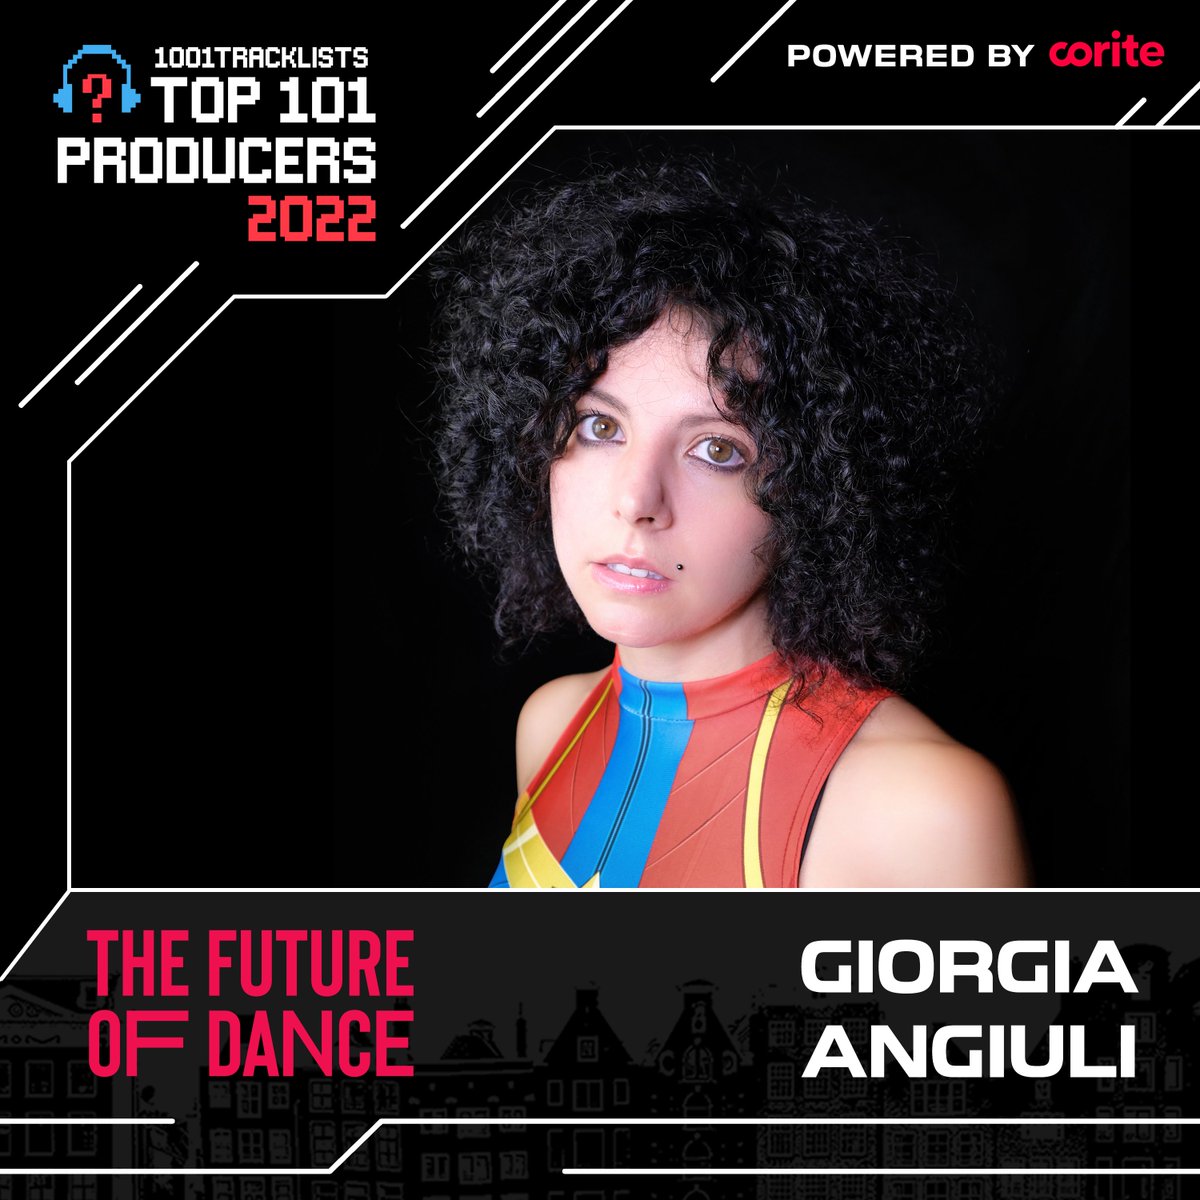 .@giorgia_angiuli's live sets are on another level, with her creatively sampling different toys and instruments. She's also a fantastic producer, and released her melodic techno album 'Quantum Love' at the end of last year. #TheFutureOfDance2022 #Top101Producers2022